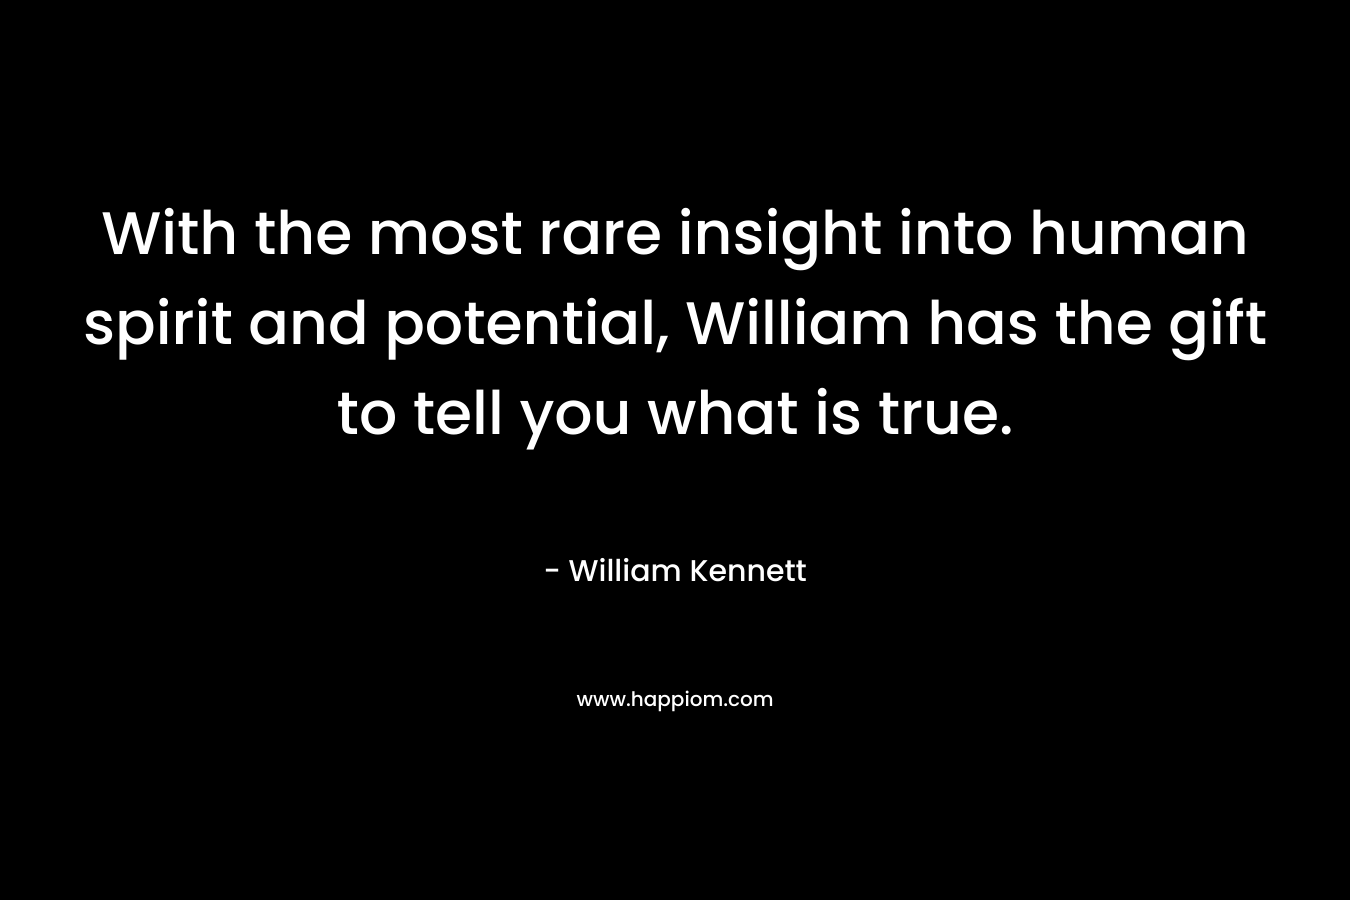 With the most rare insight into human spirit and potential, William has the gift to tell you what is true. – William Kennett